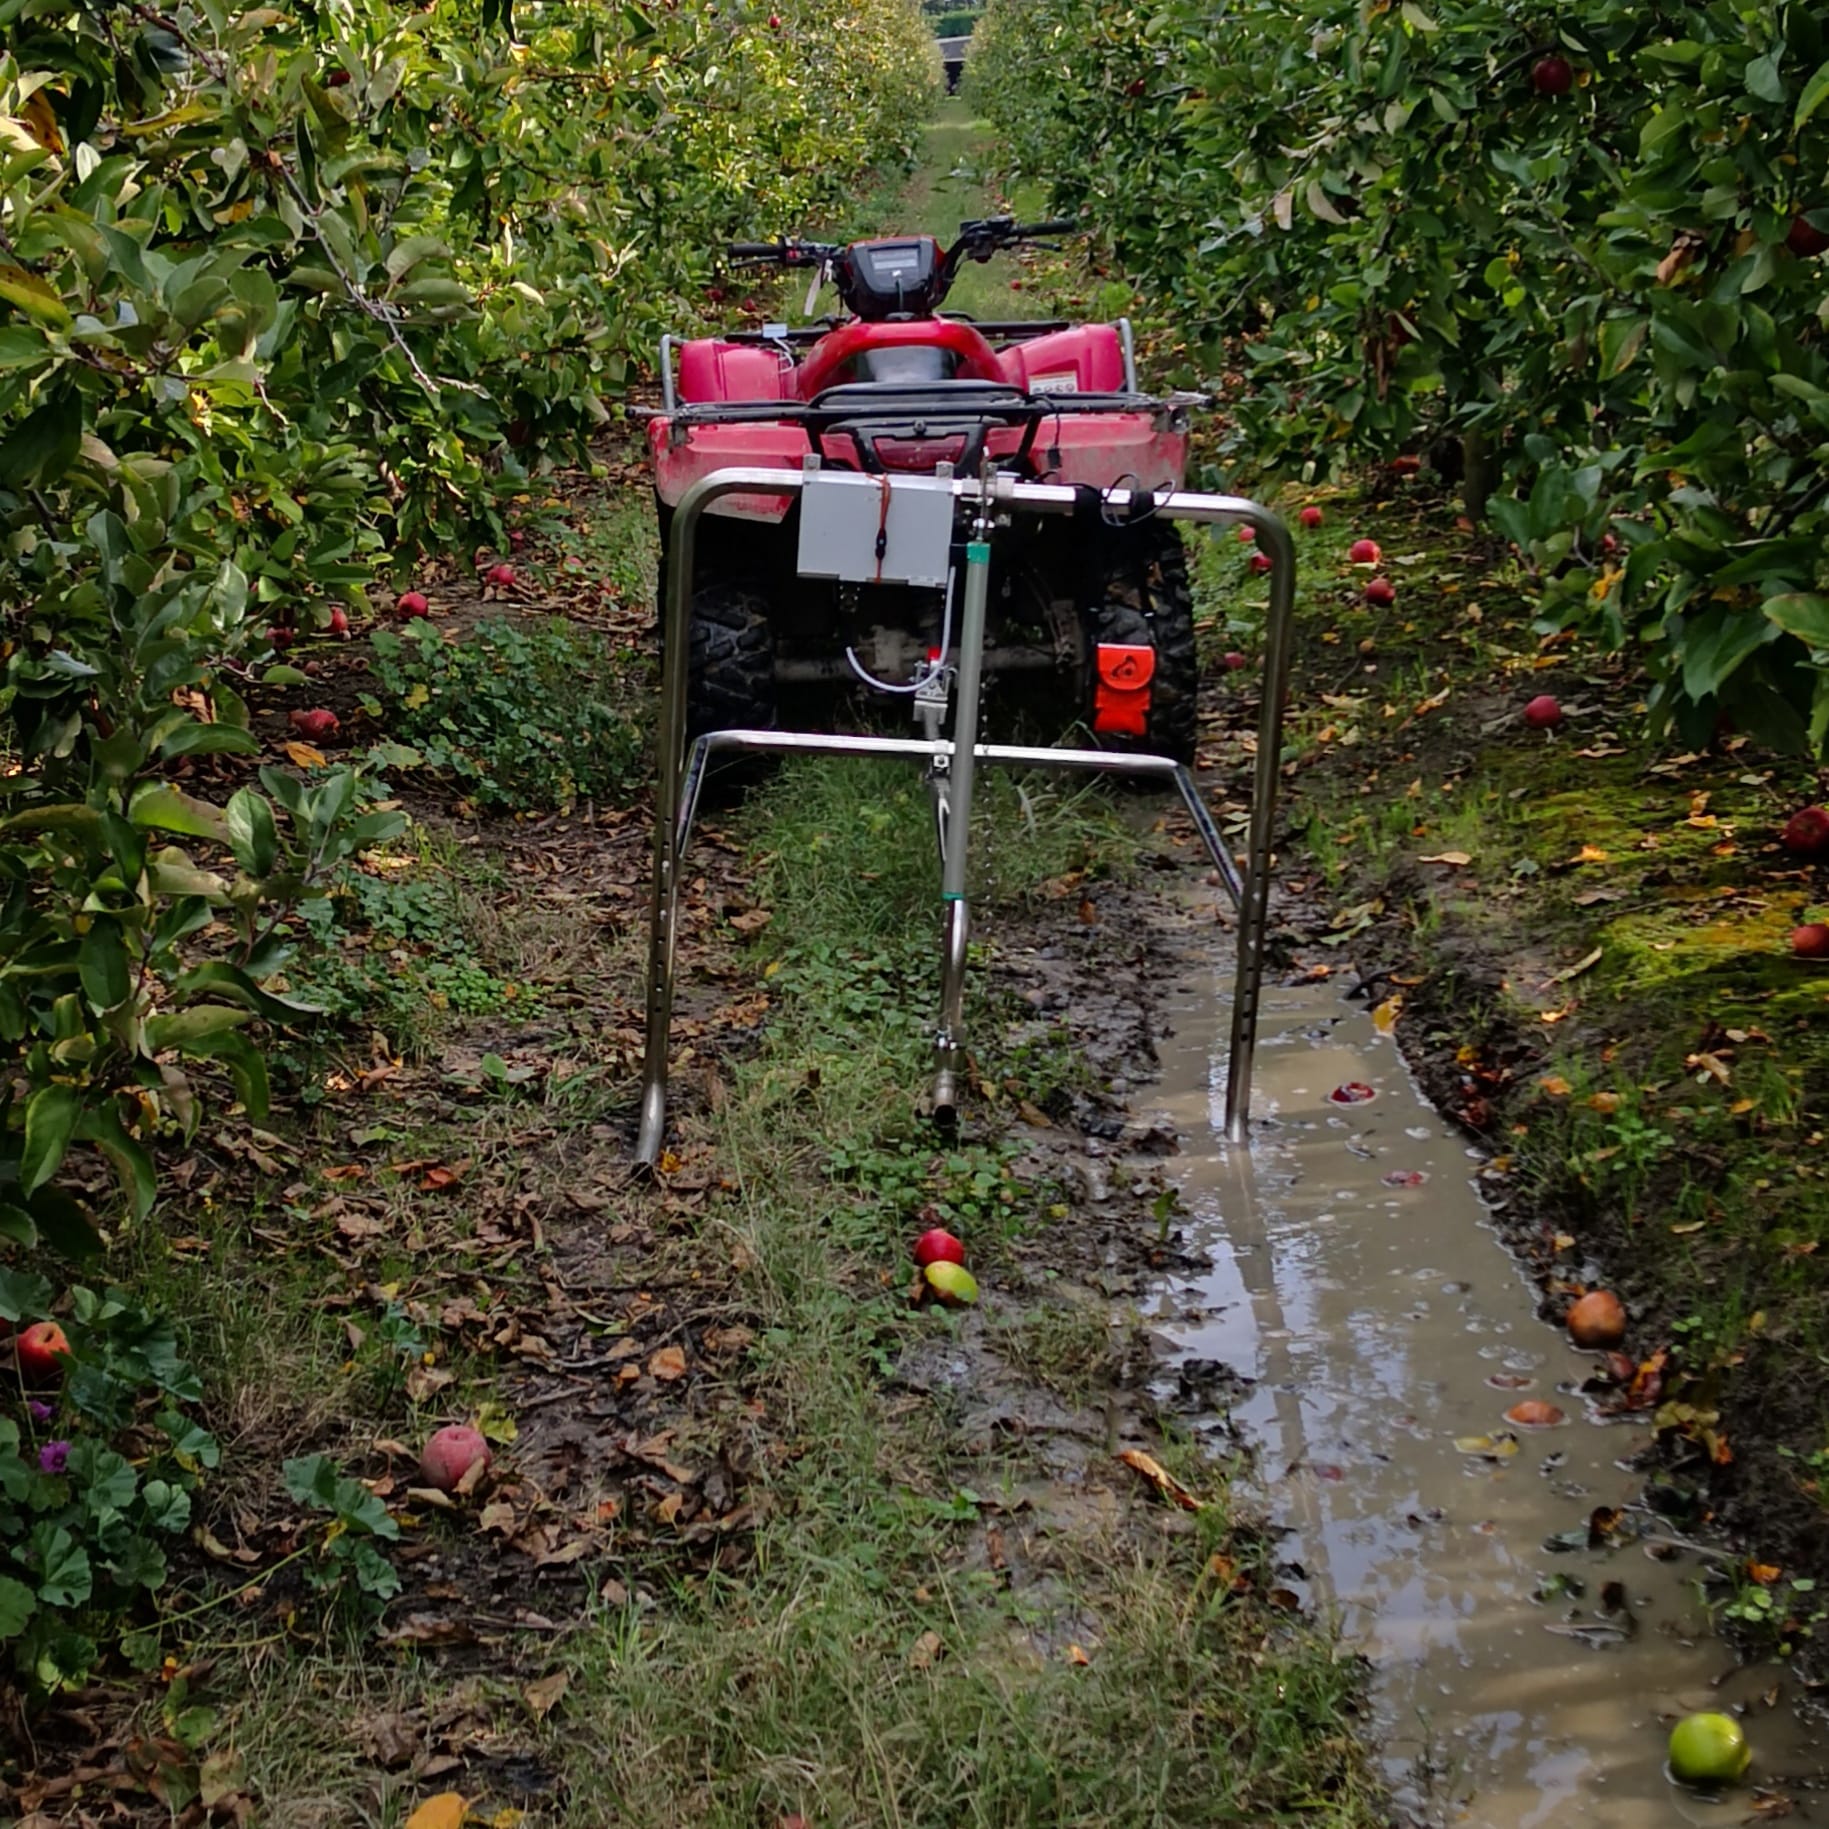 The RutRec setup was used to regularly survey the effects of each treatment on ponding.